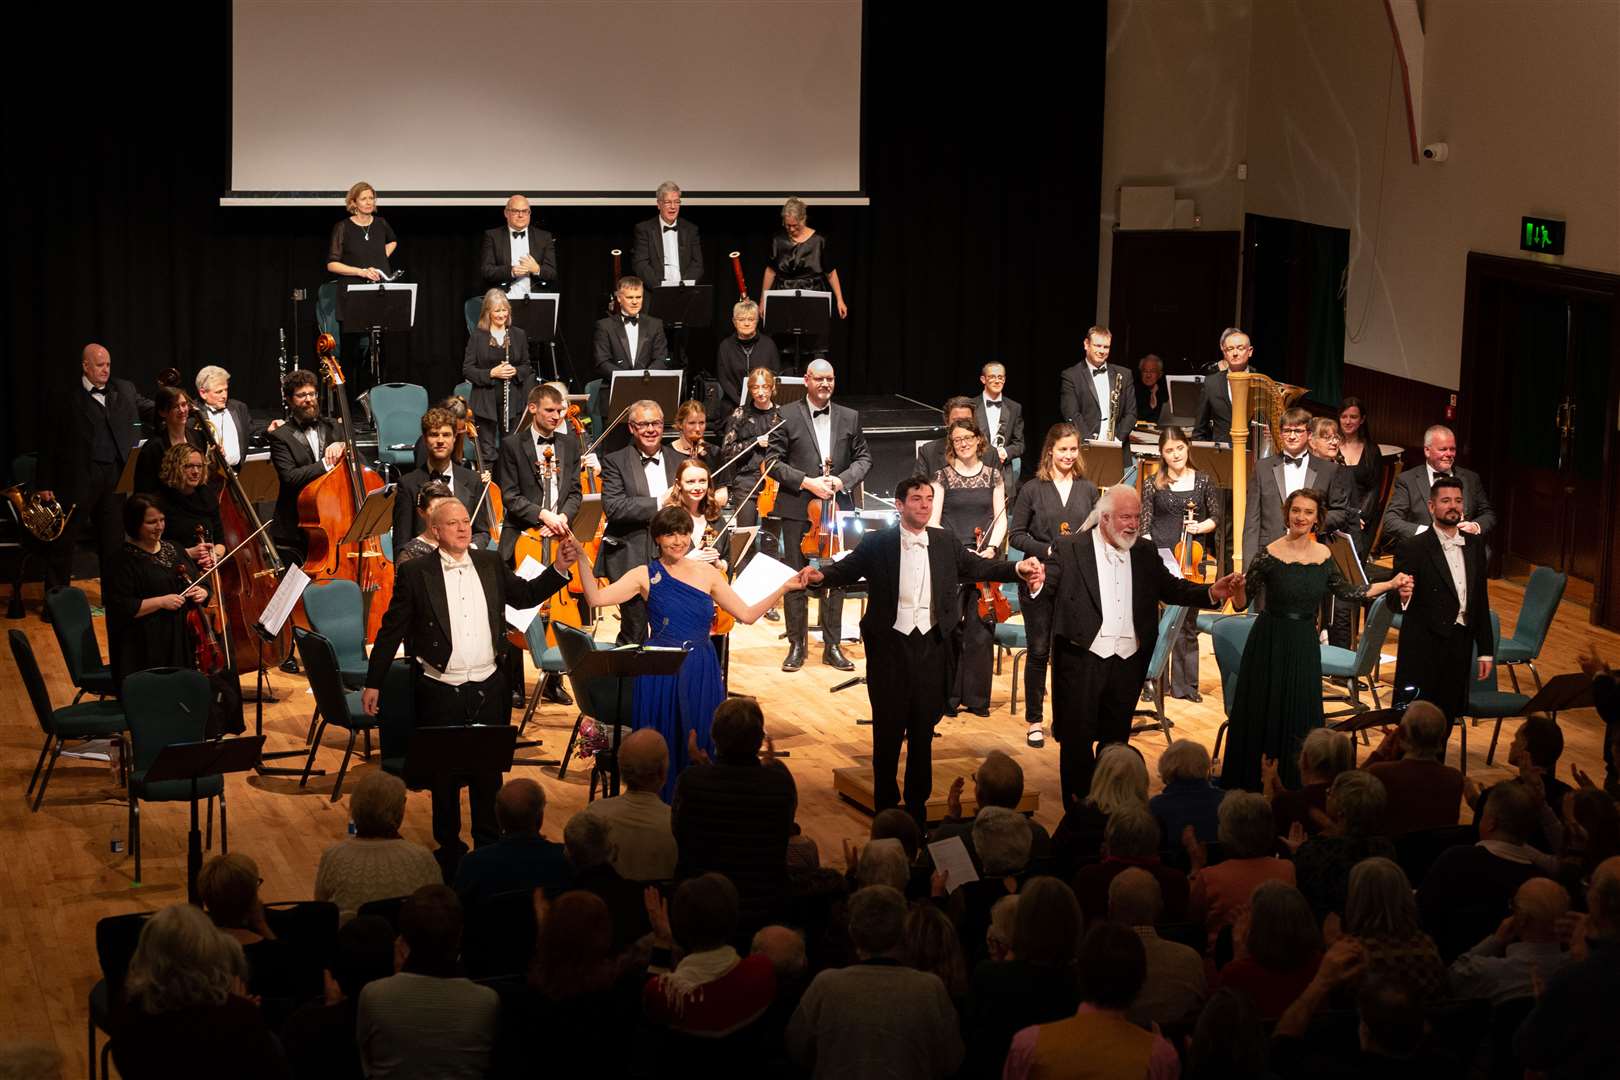 The Mahler Players on stage. Picture: S Leakey